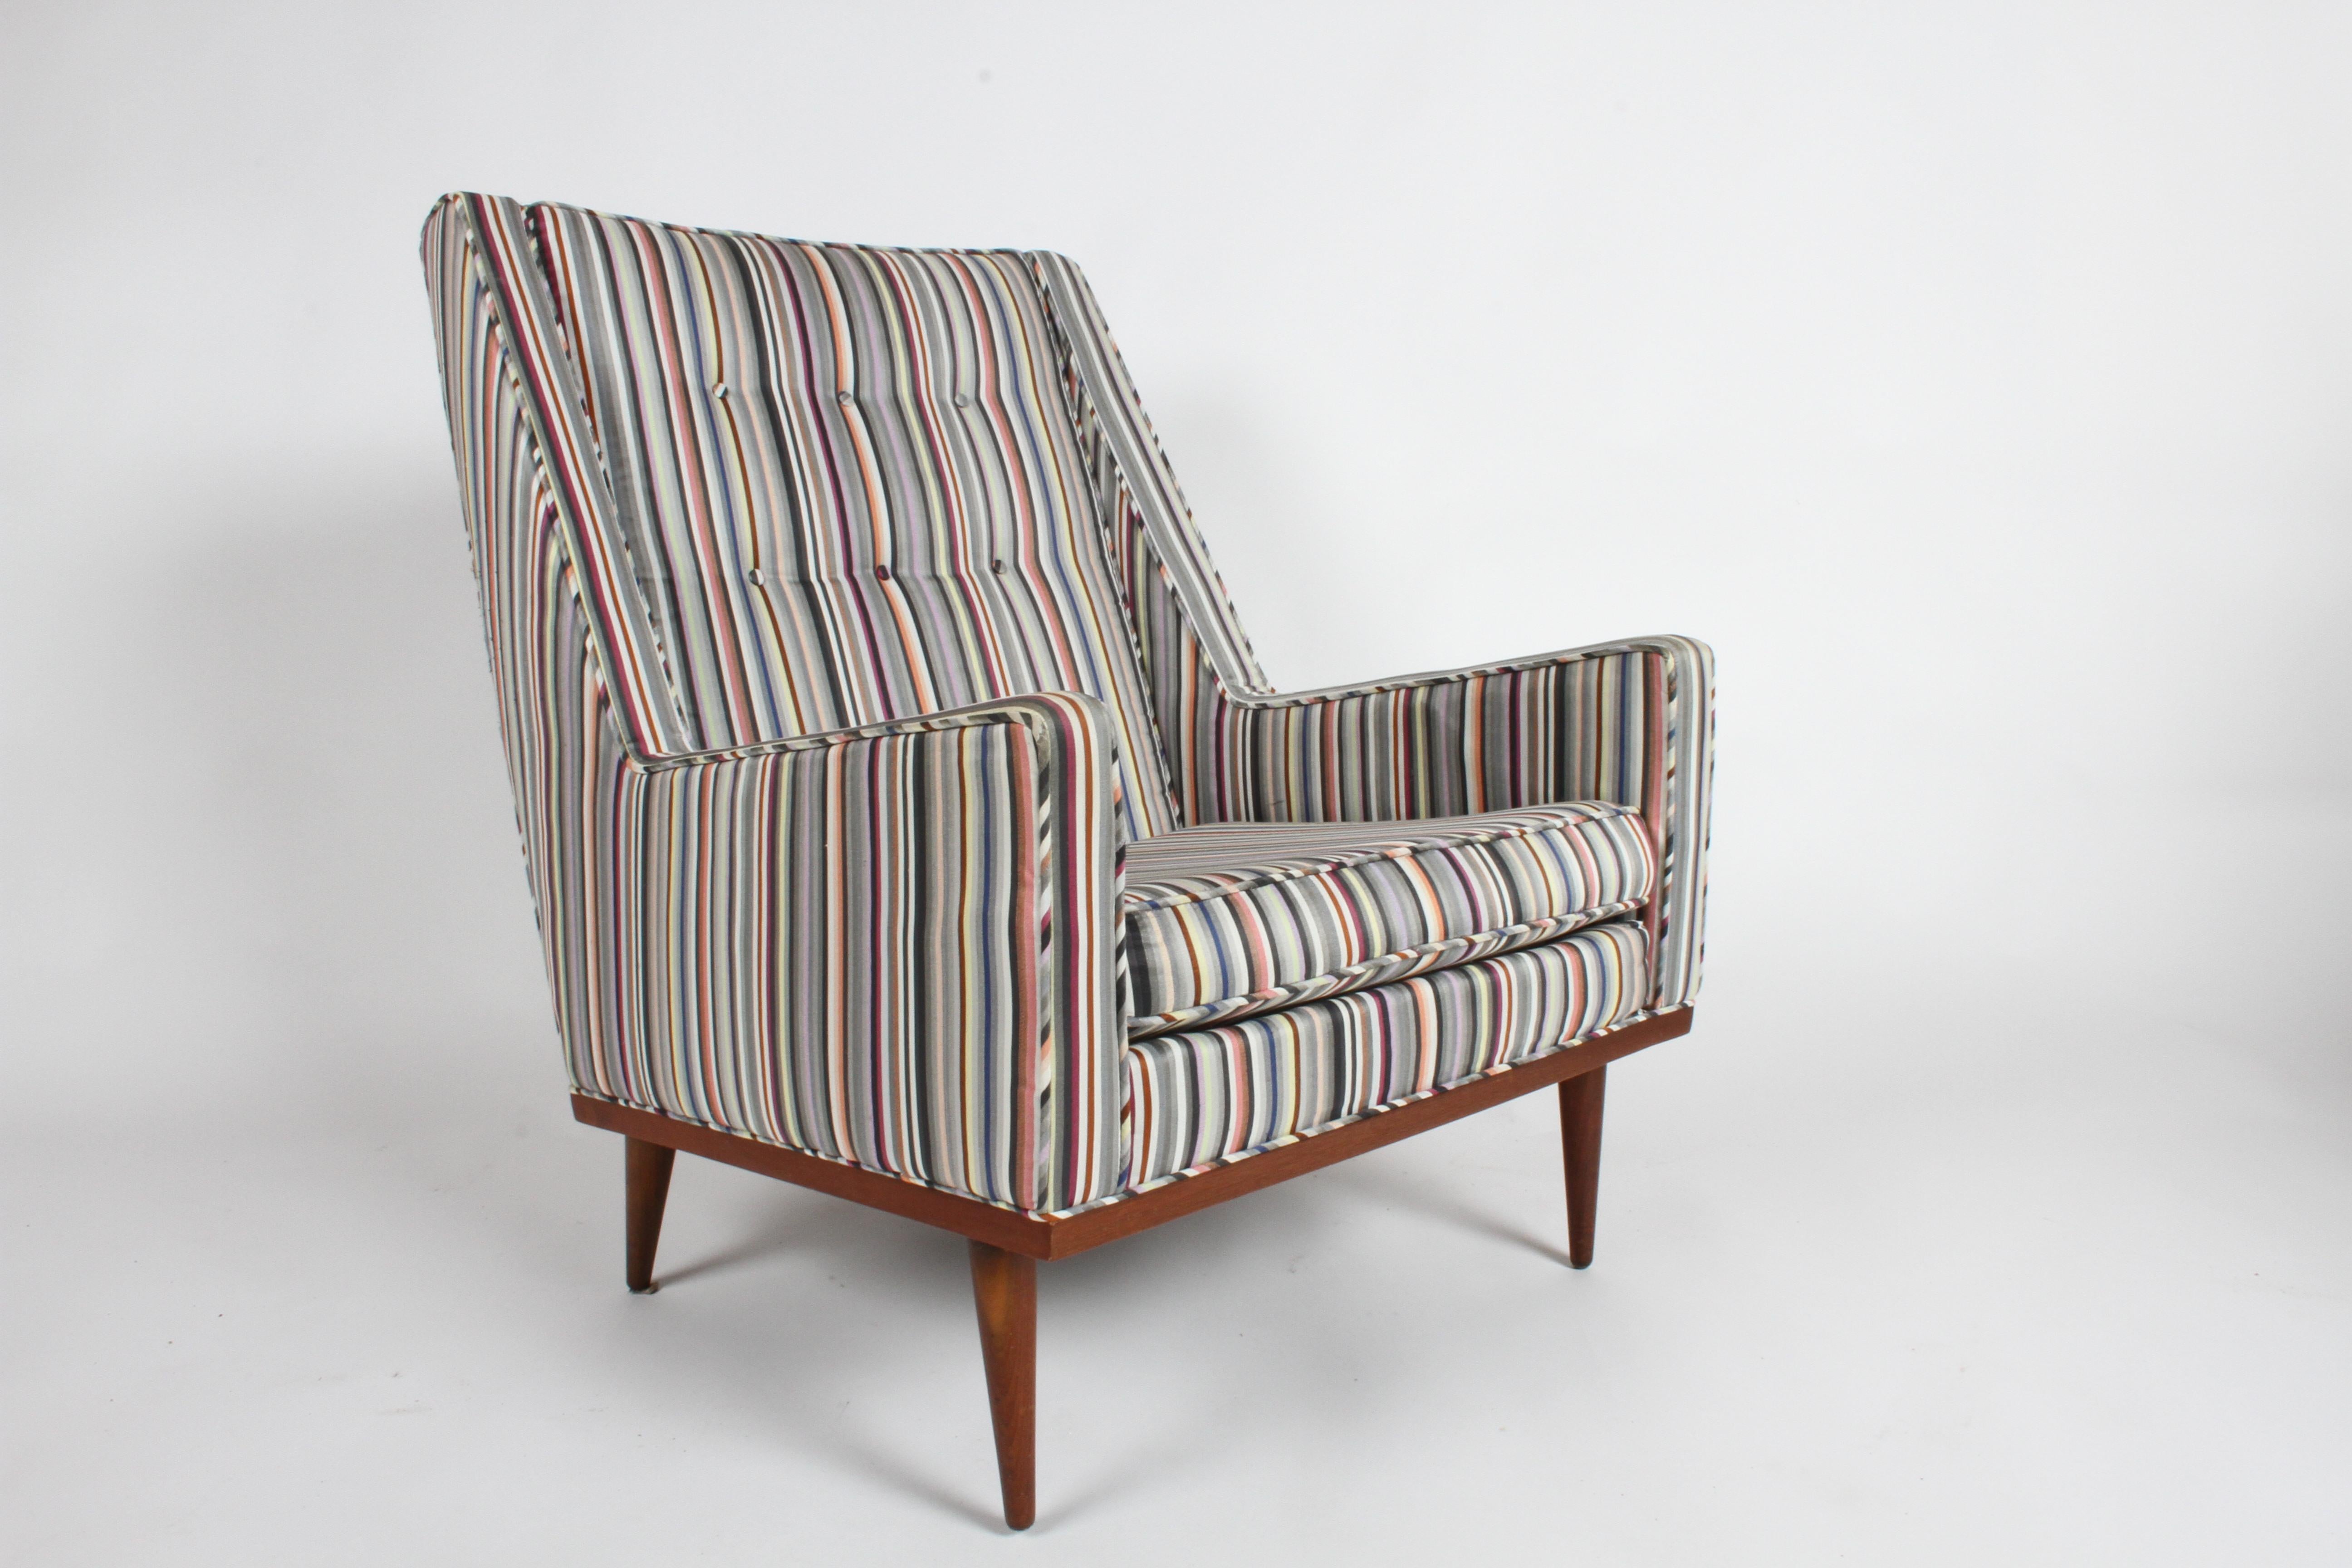 Milo Baughman for James Inc. King lounge chair, part of his articulate seating collection with Classic midcentury lines. This chair was reupholstered at some point in the last 10 years with a very handsome Paul Smith looking stripe upholstery,